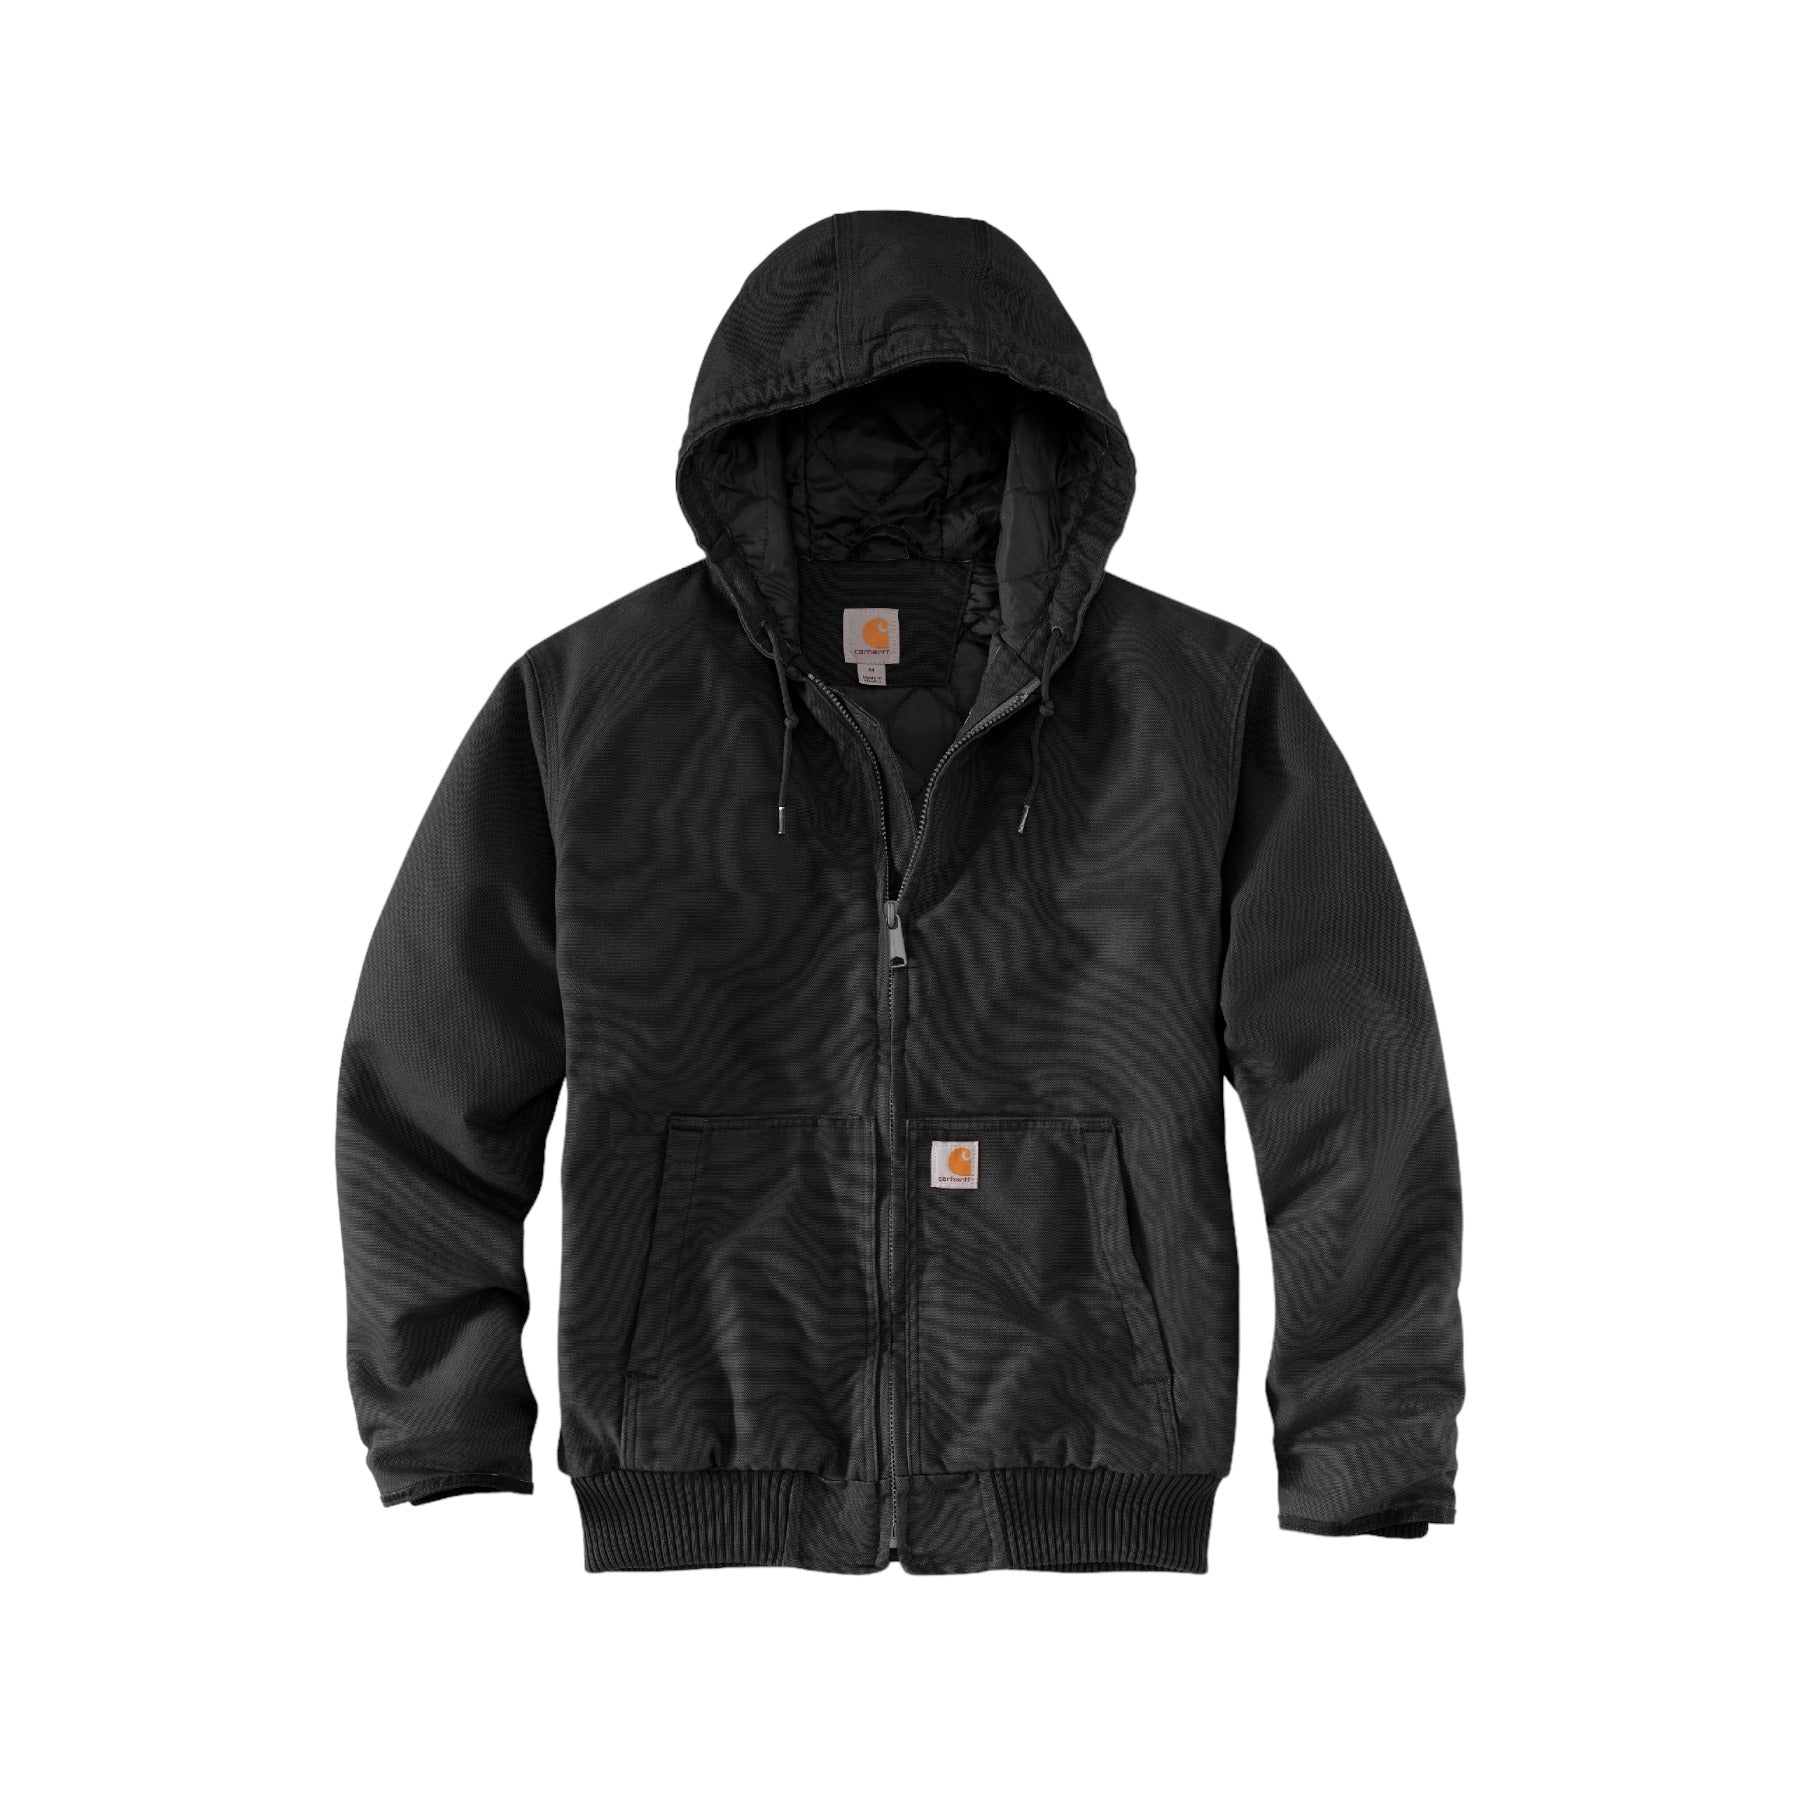 Carhartt Washed Duck Insulated Jacket - Black